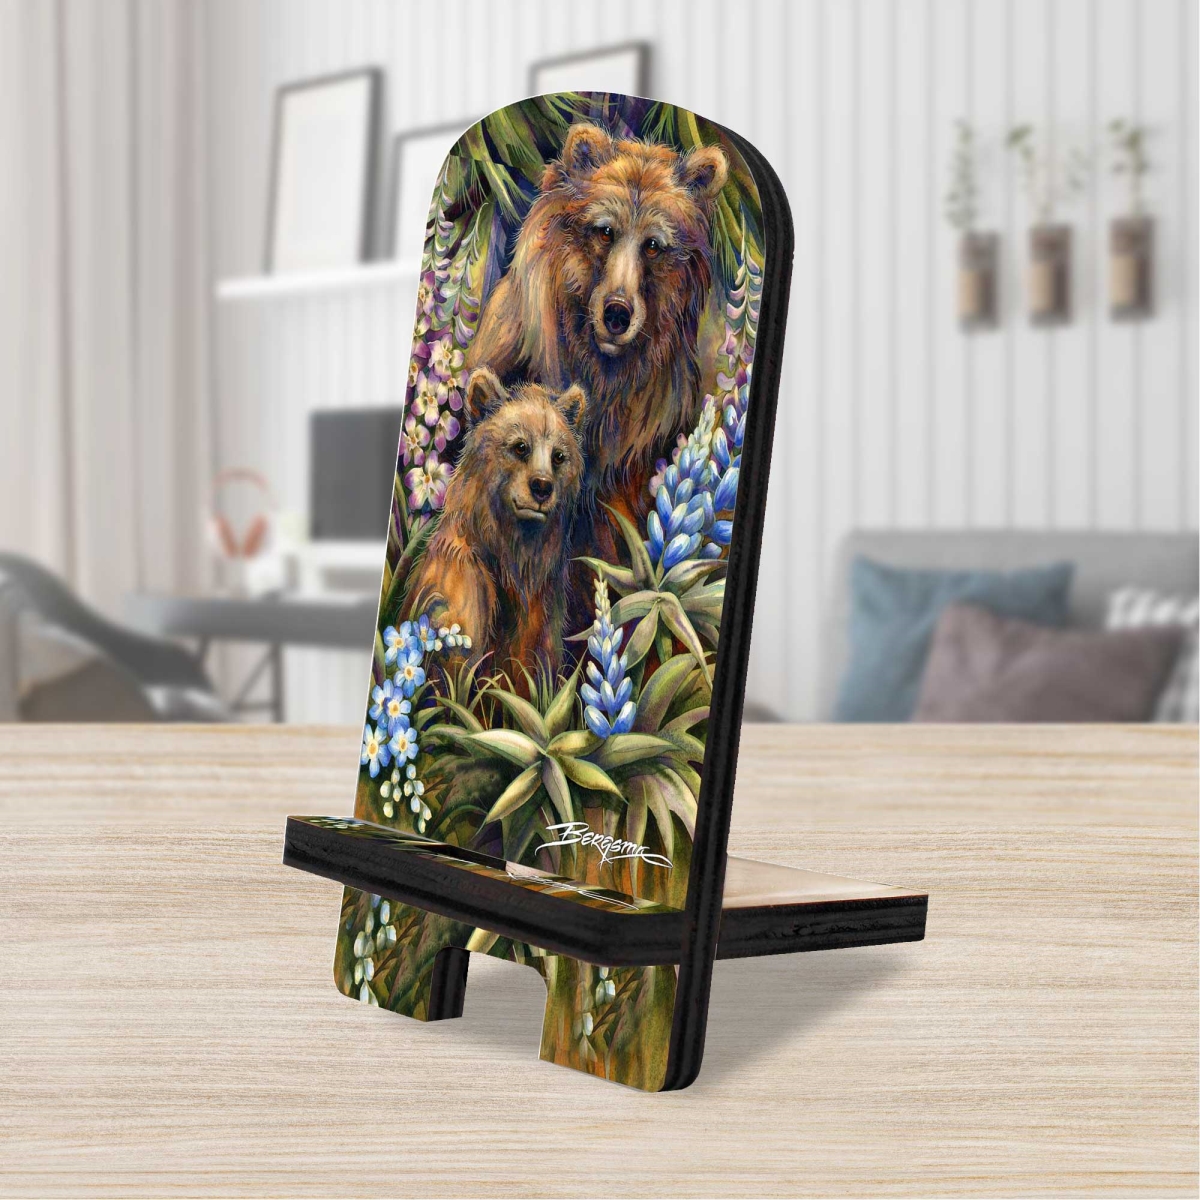 Designocracy 892092-JB 6 x 3 x 3 in. Grin & Bear it Grizzly Mother & Cub Cell Phone Stand Wildlife Decor with Wood Mobile Holder Organizer